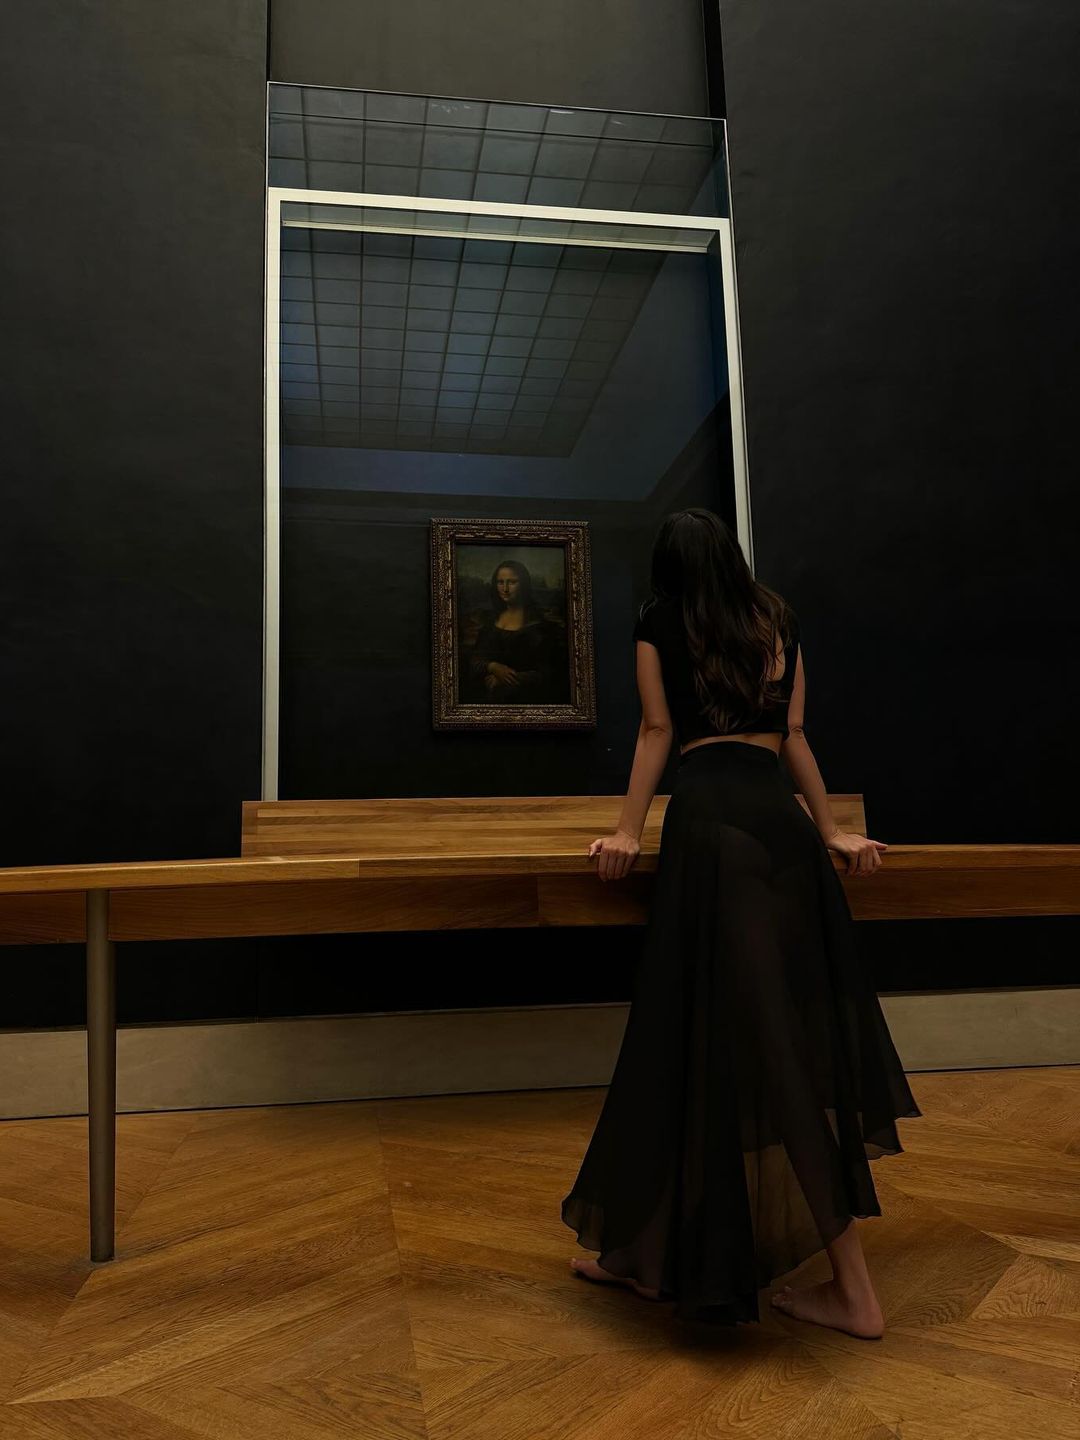 Kendall Jenner looking at the Mona Lisa